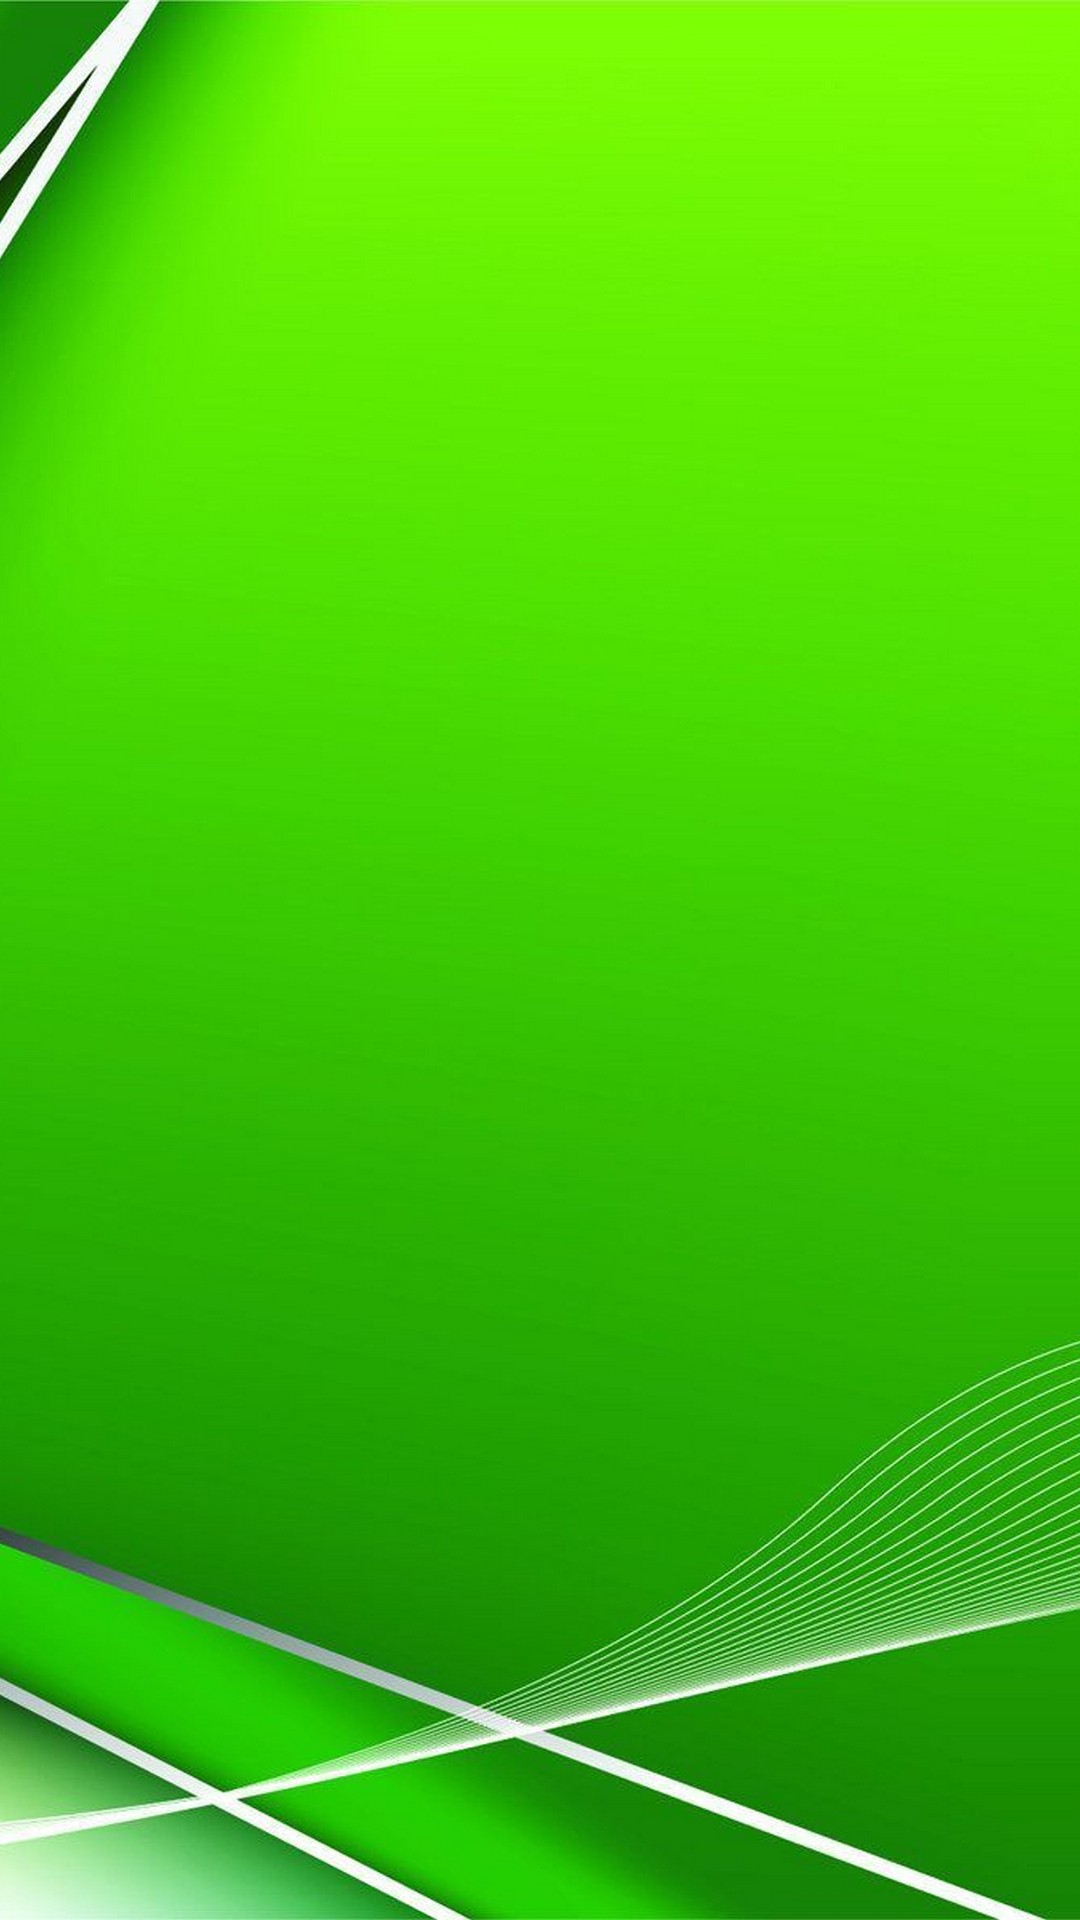 Wallpaper Android Neon Green with image resolution 1080x1920 pixel. You can make this wallpaper for your Android backgrounds, Tablet, Smartphones Screensavers and Mobile Phone Lock Screen